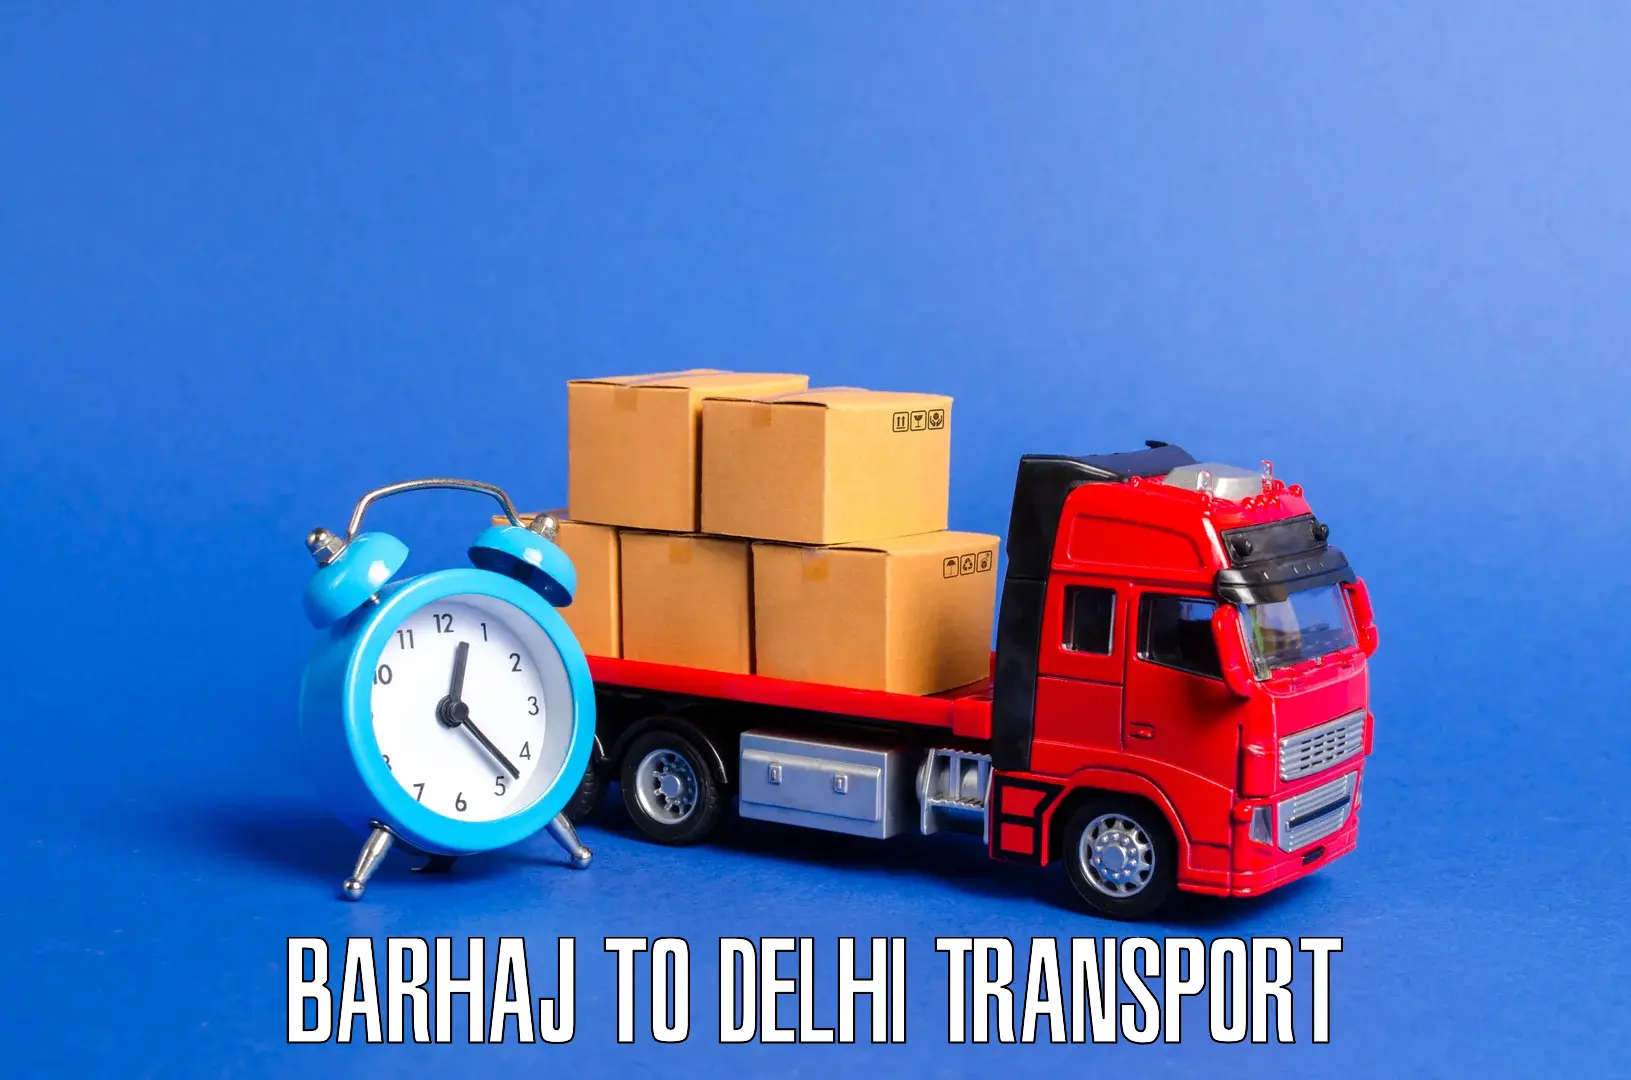 Transport bike from one state to another Barhaj to NCR